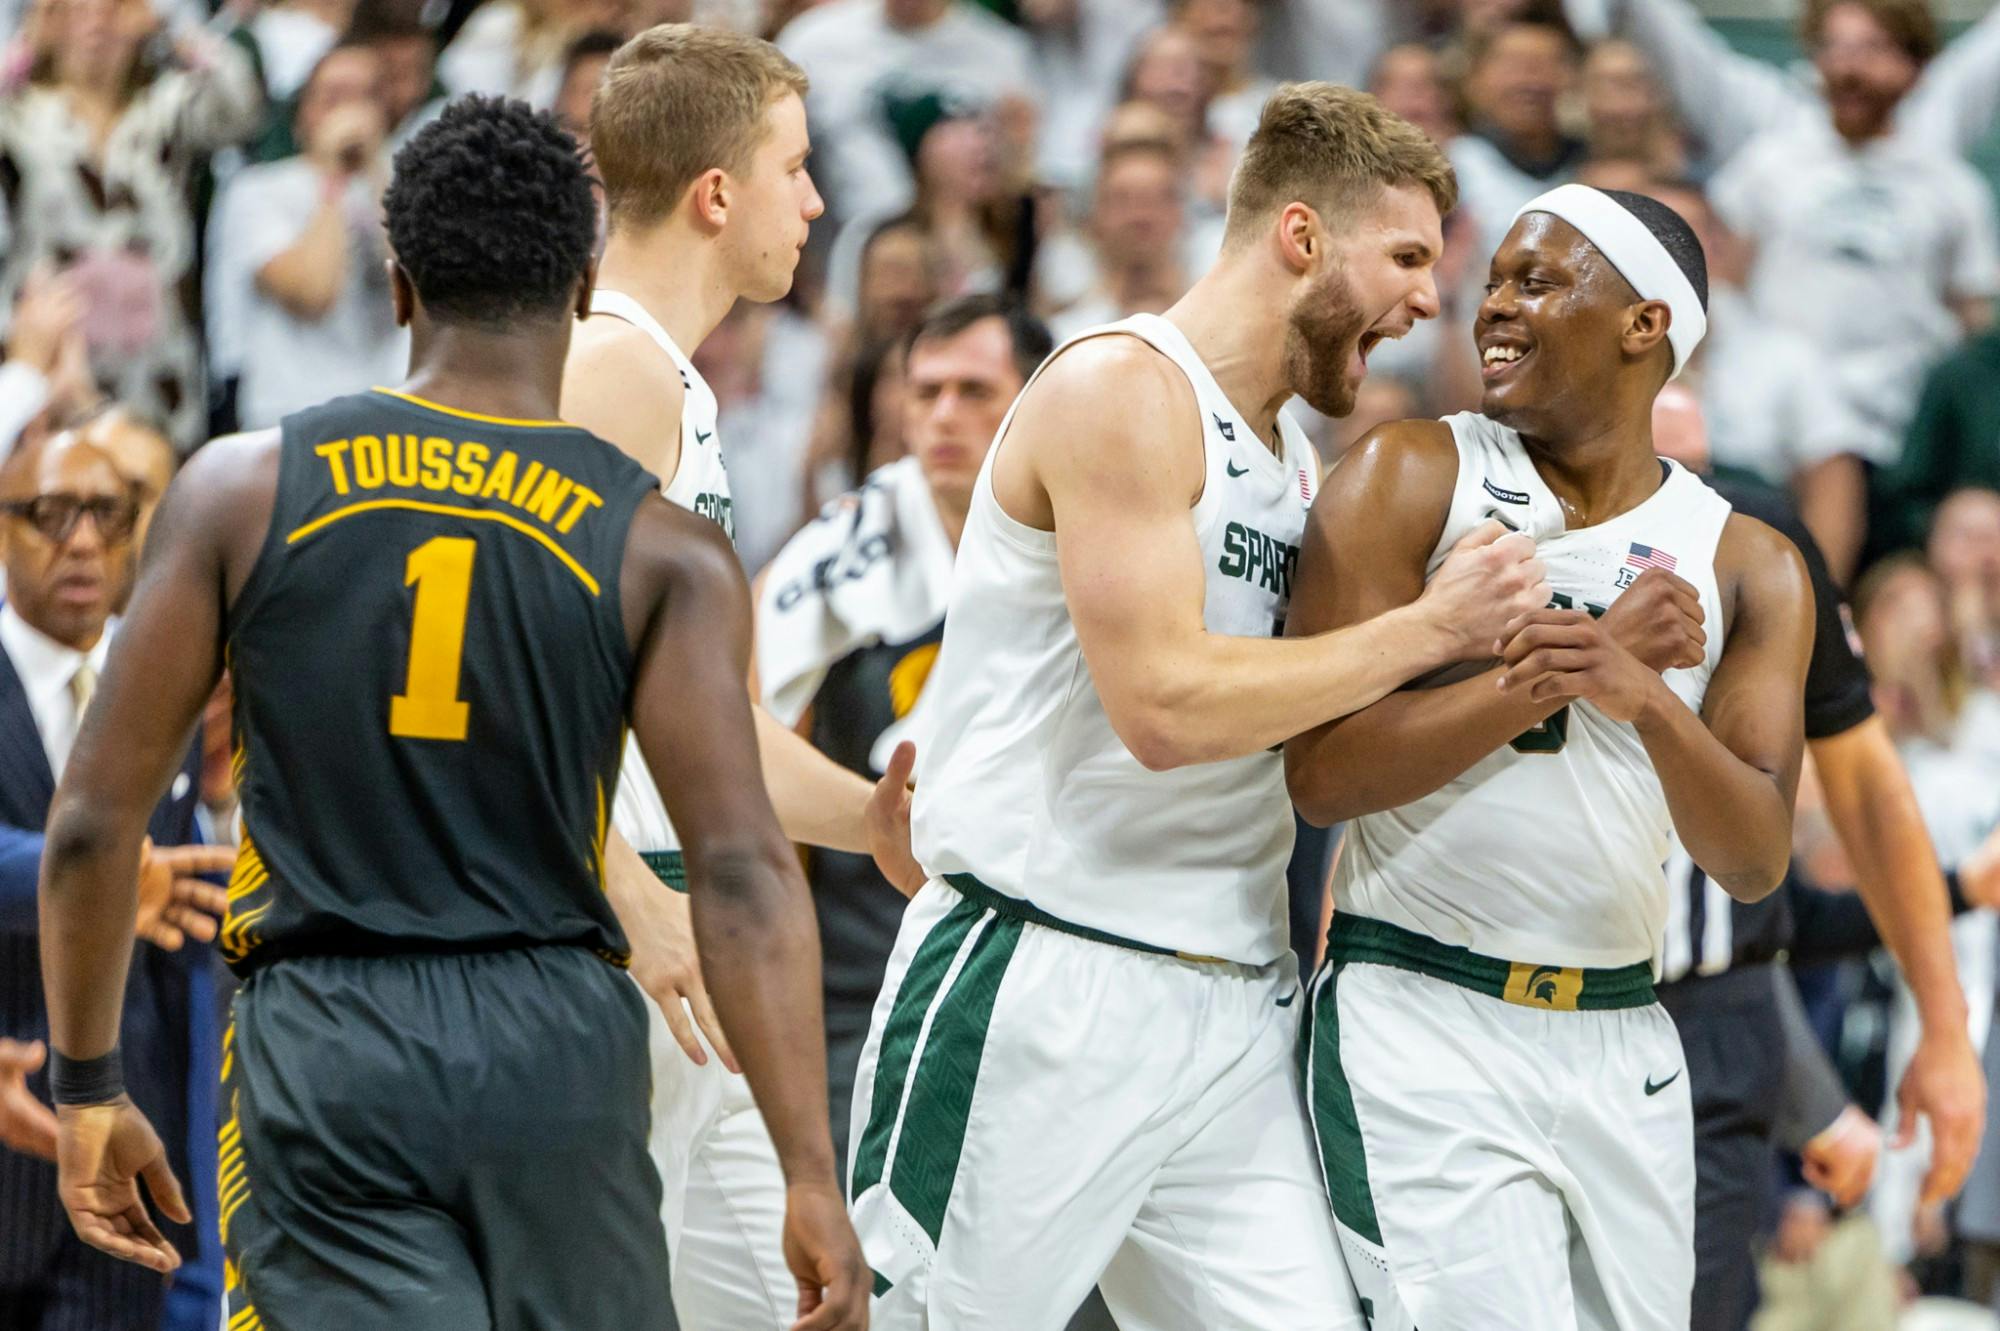 Senior forward Kyle Ahrens (left) celebrates retaking the lead with senior guard Cassius Winston (right) during a game against Iowa. The Spartans defeated the Hawkeyes, 78-70, at the Breslin Student Events Center on February 25, 2020. 